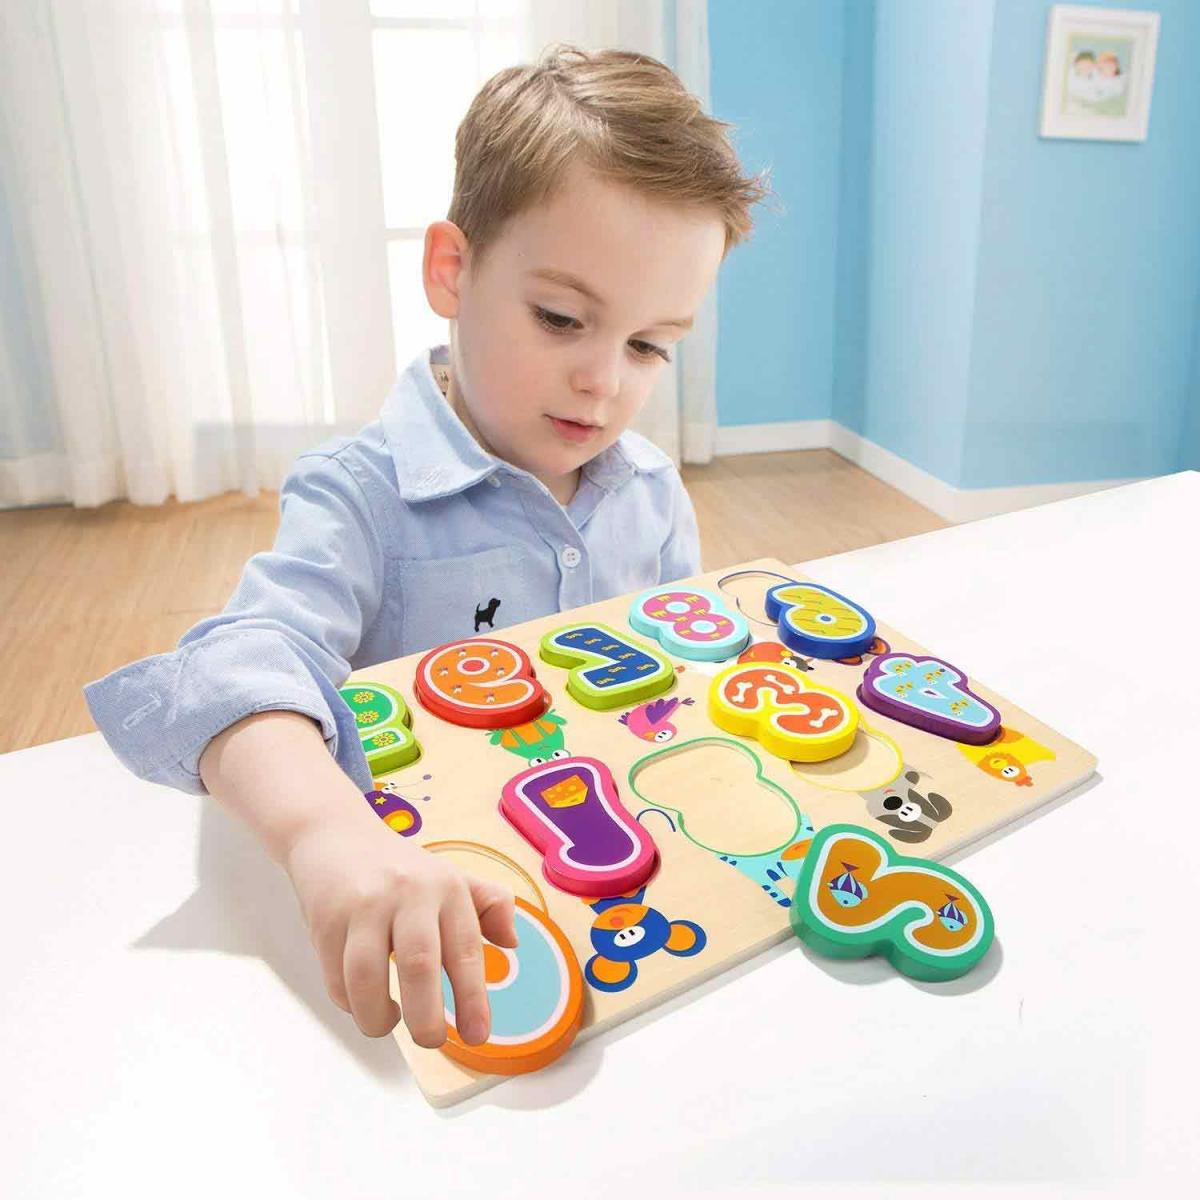 Top Bright Wooden Number Puzzle